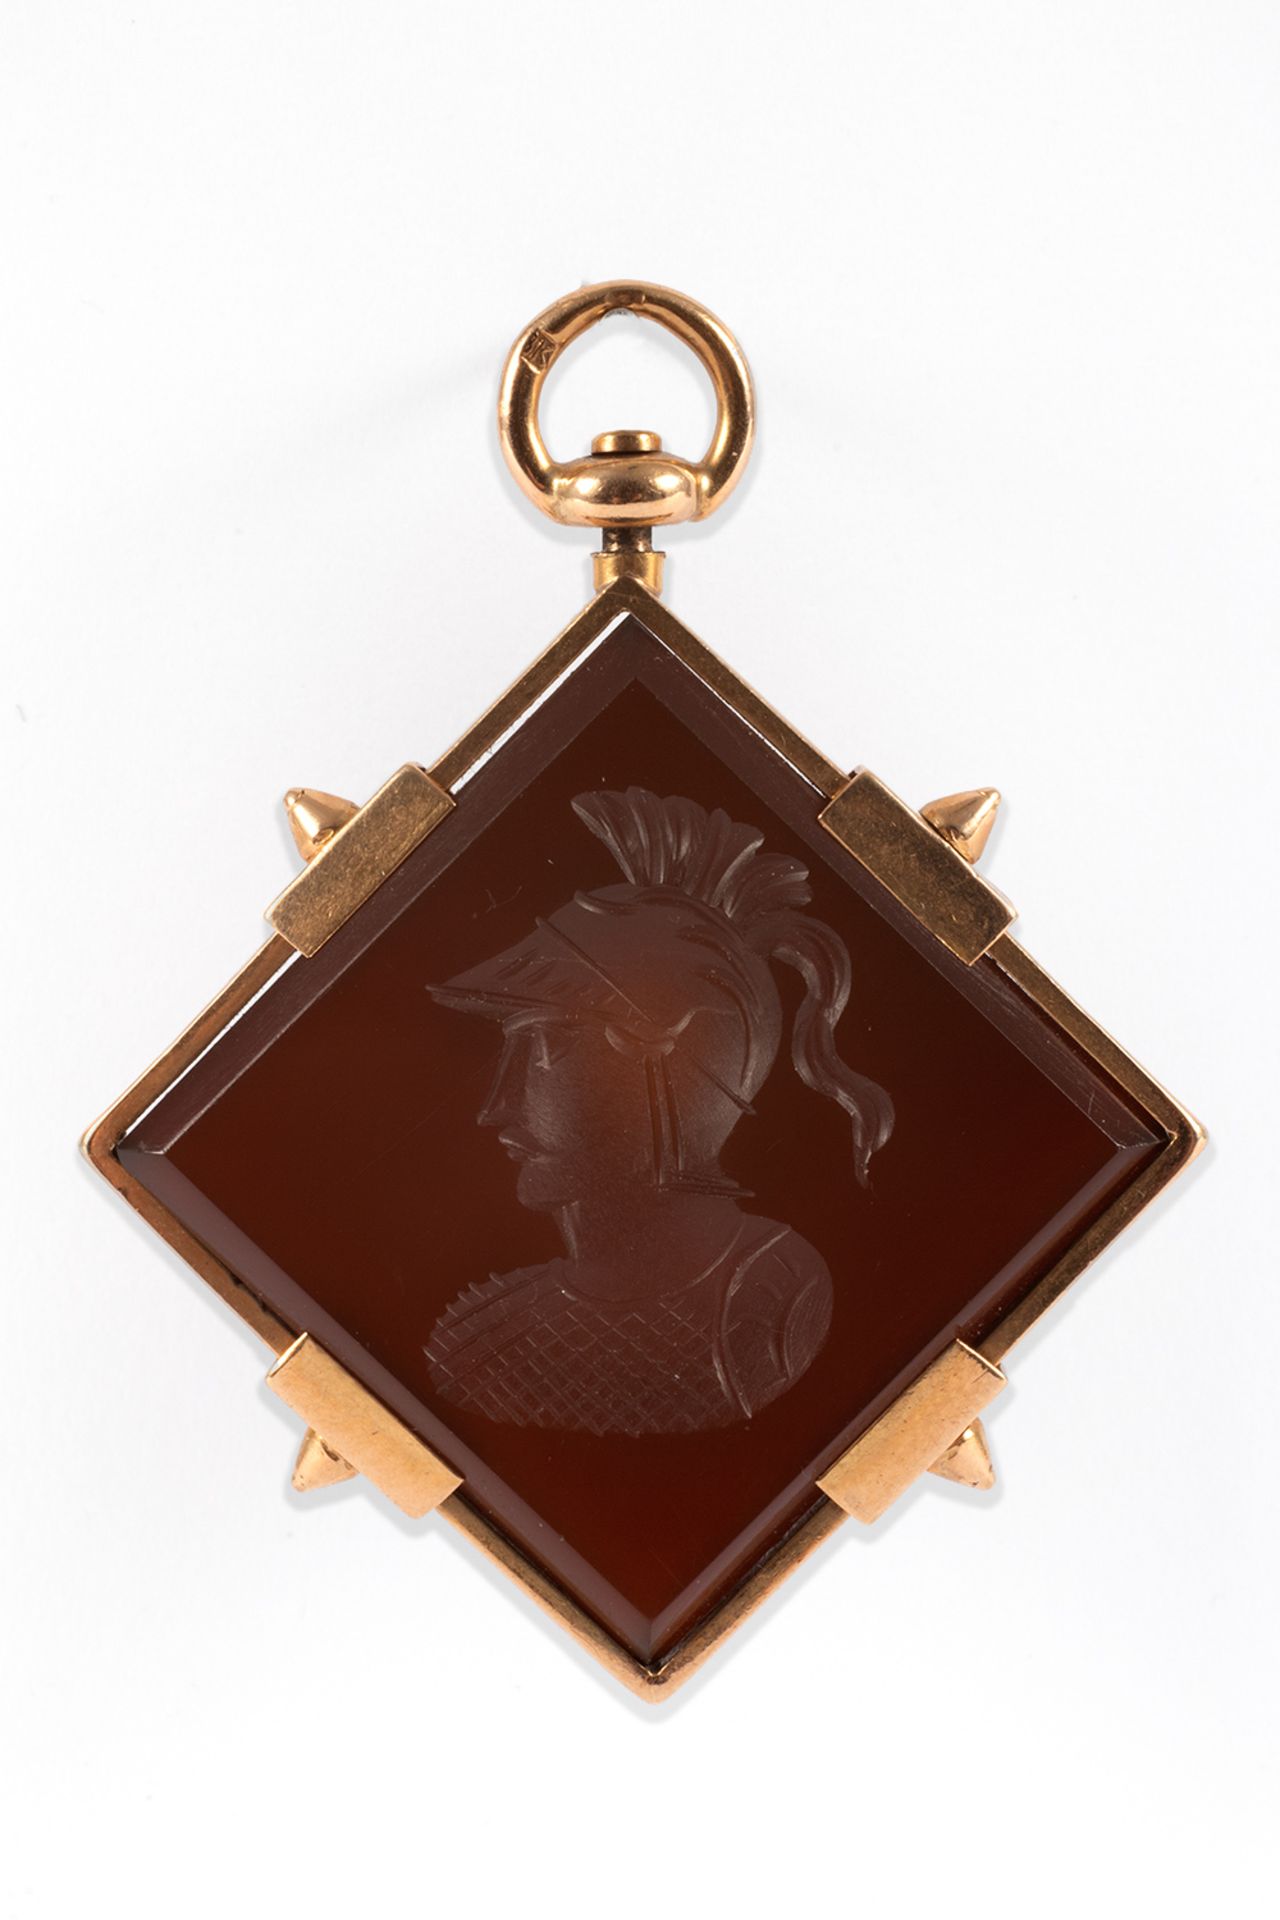 Pendant in gold and carved agate.